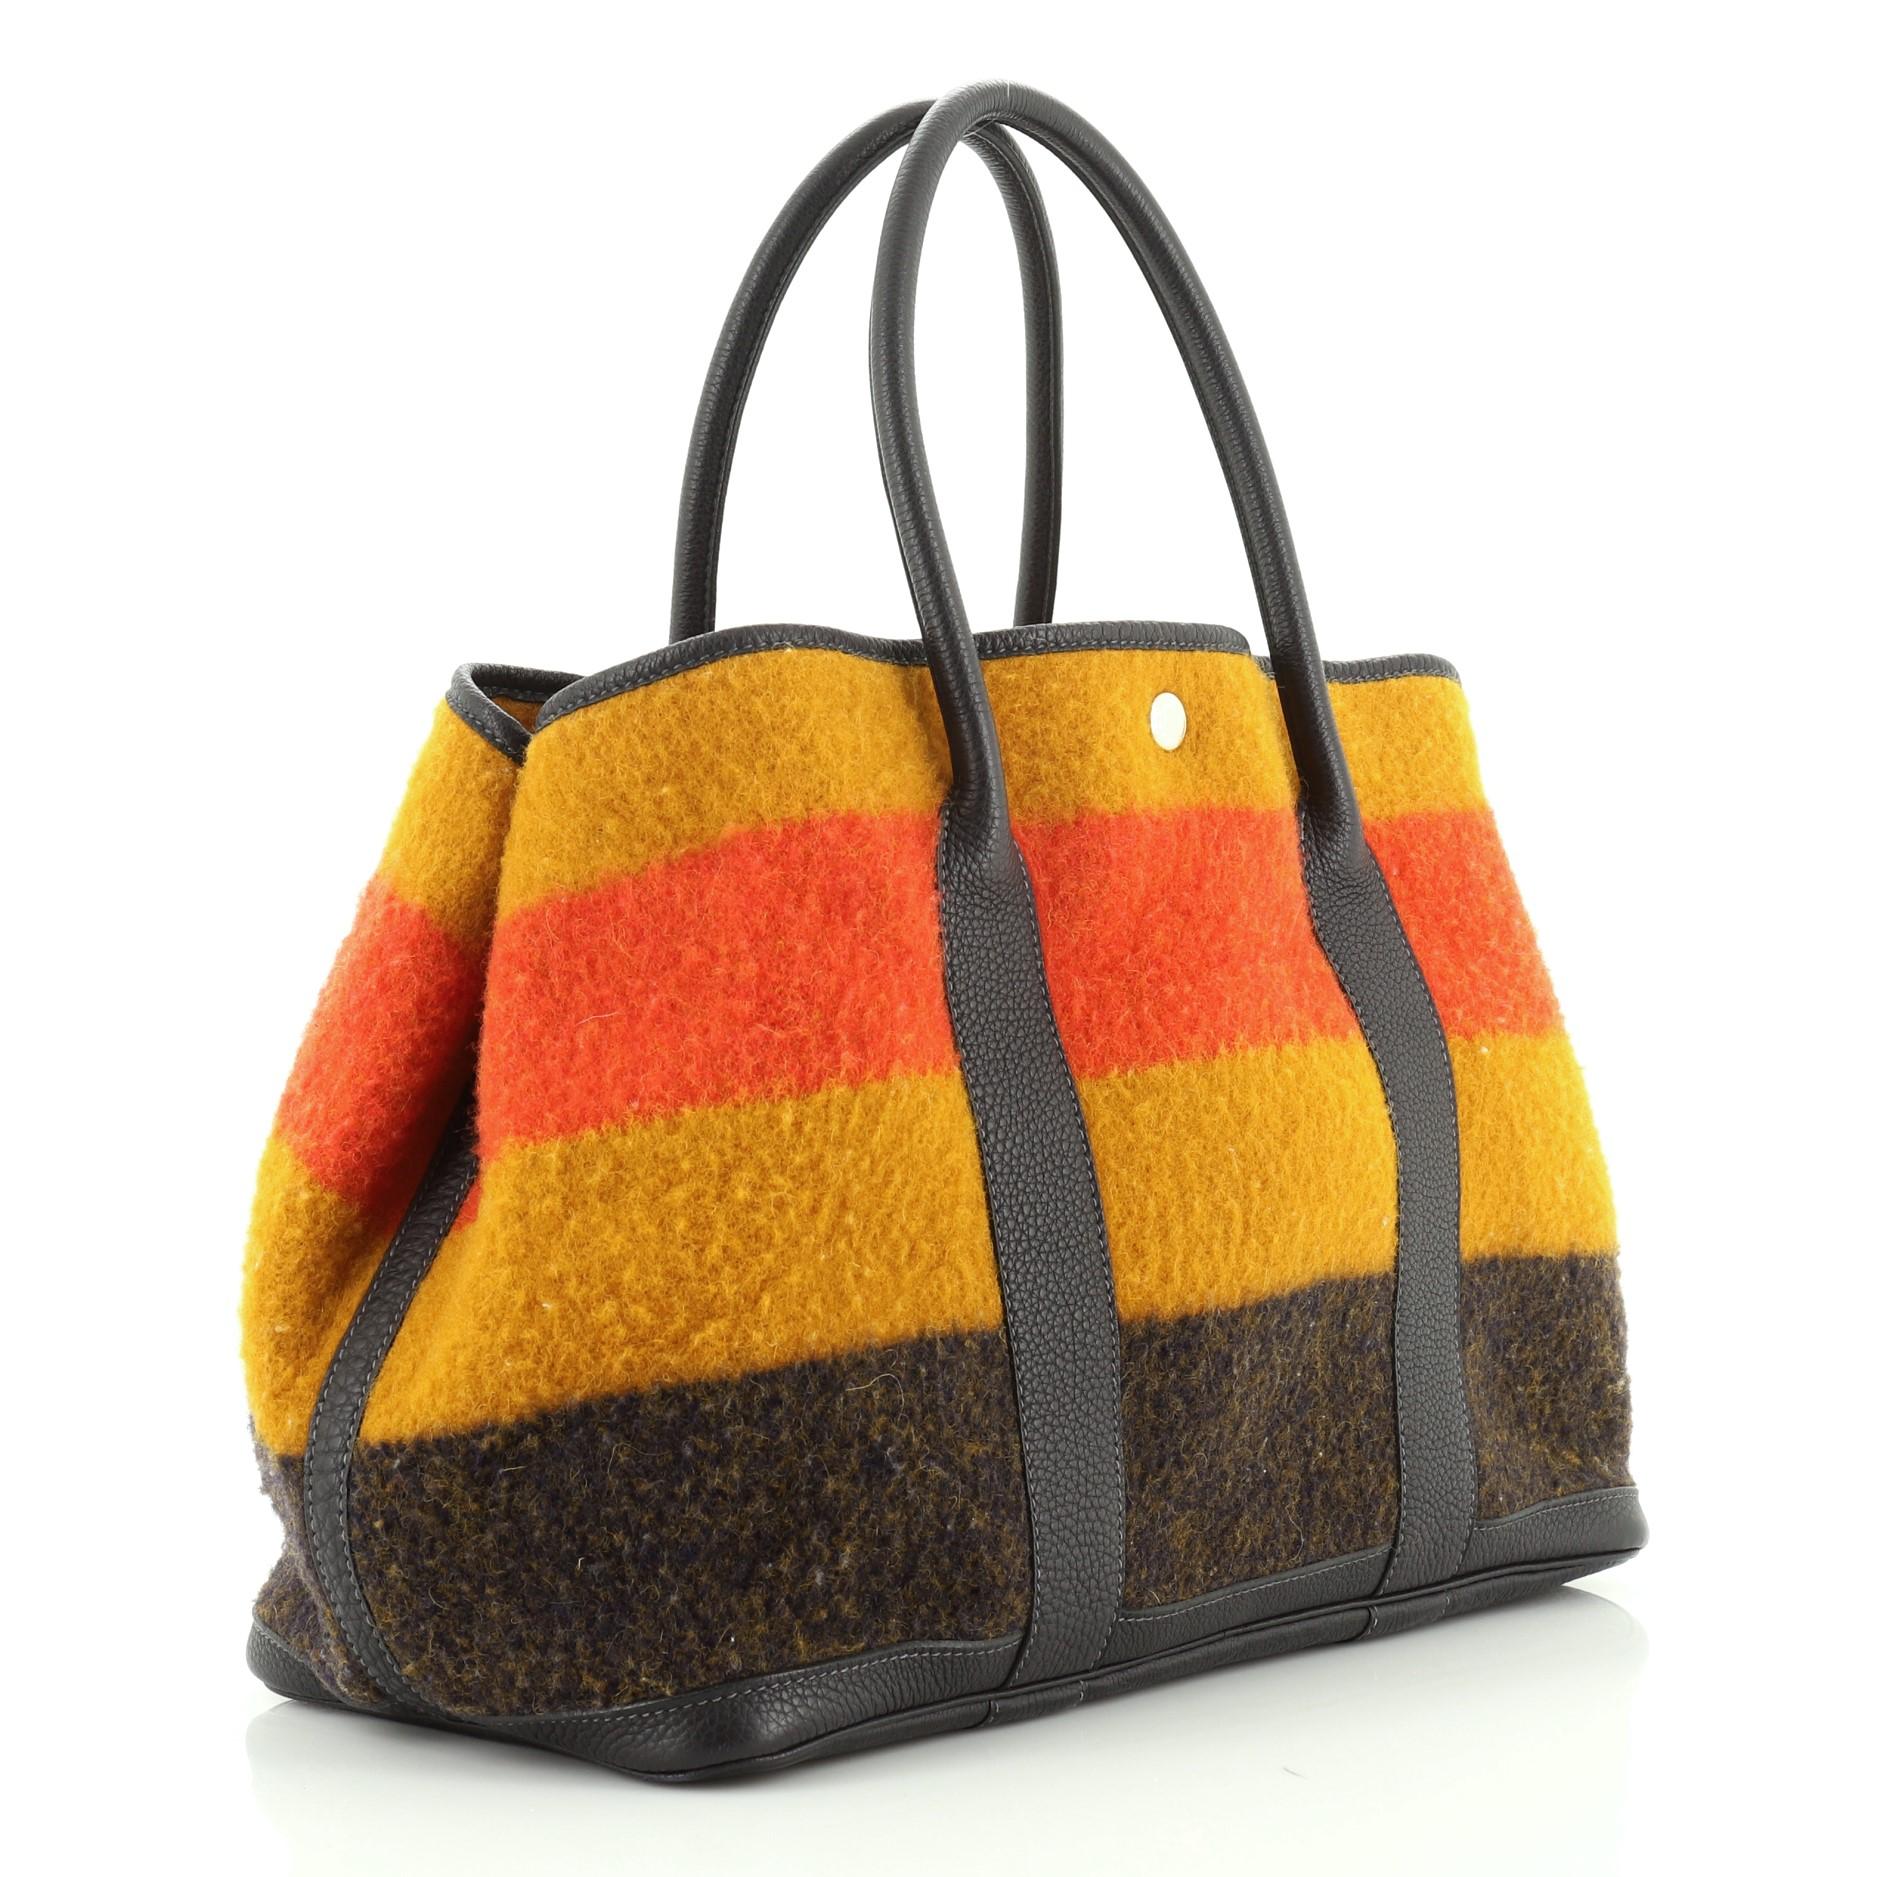 This Hermes Garden Party Tote Rocabar and Leather 36, crafted in Multicolor Rocabar and Indigo Negonda leather, features tall rolled handles and palladium hardware. Its snap closure opens to a Multicolor Rocabar interior. Date code reads: F Square